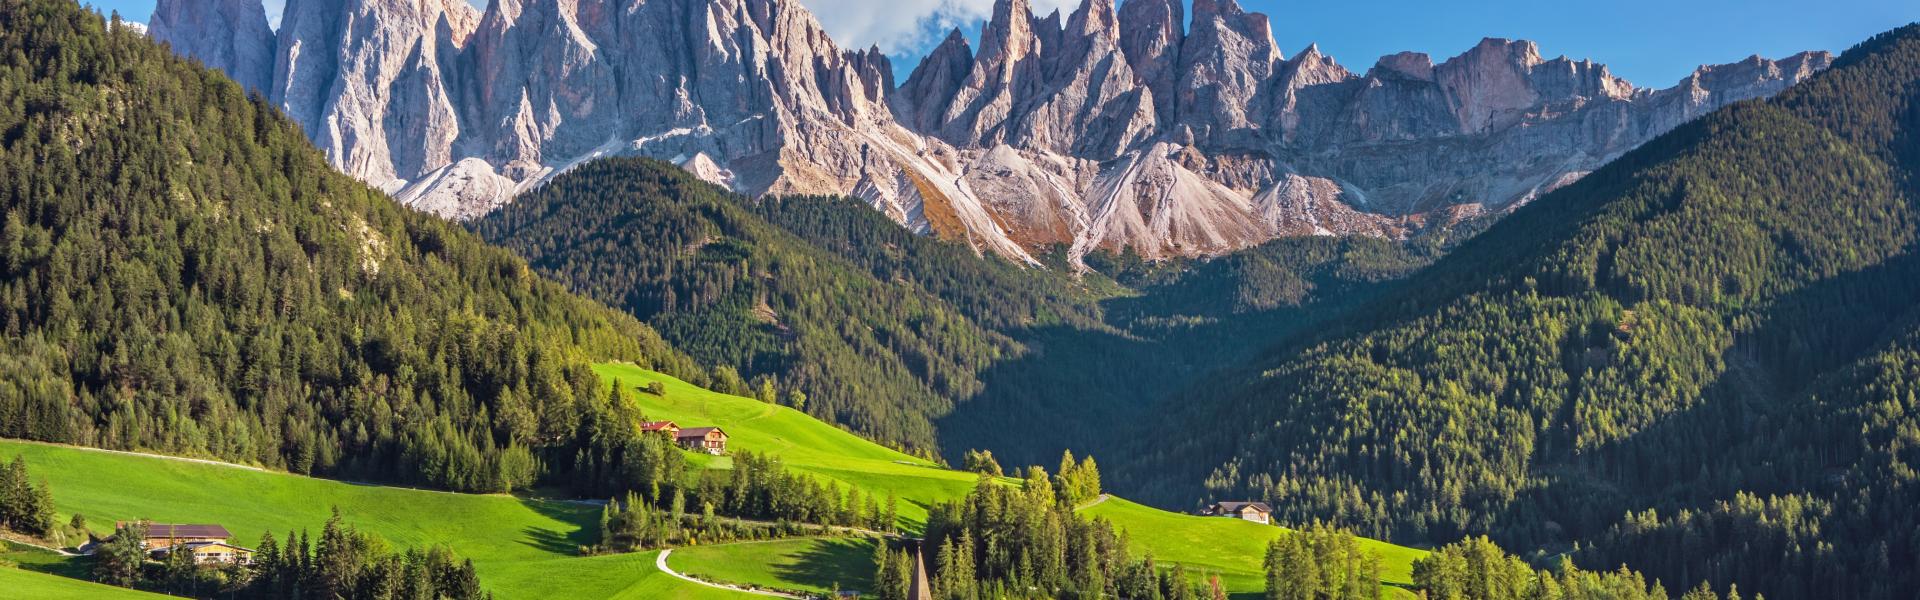 Find the ideal holiday home in Trentino-Alto Adige/South Tyrol for your Italian adventure - Casamundo